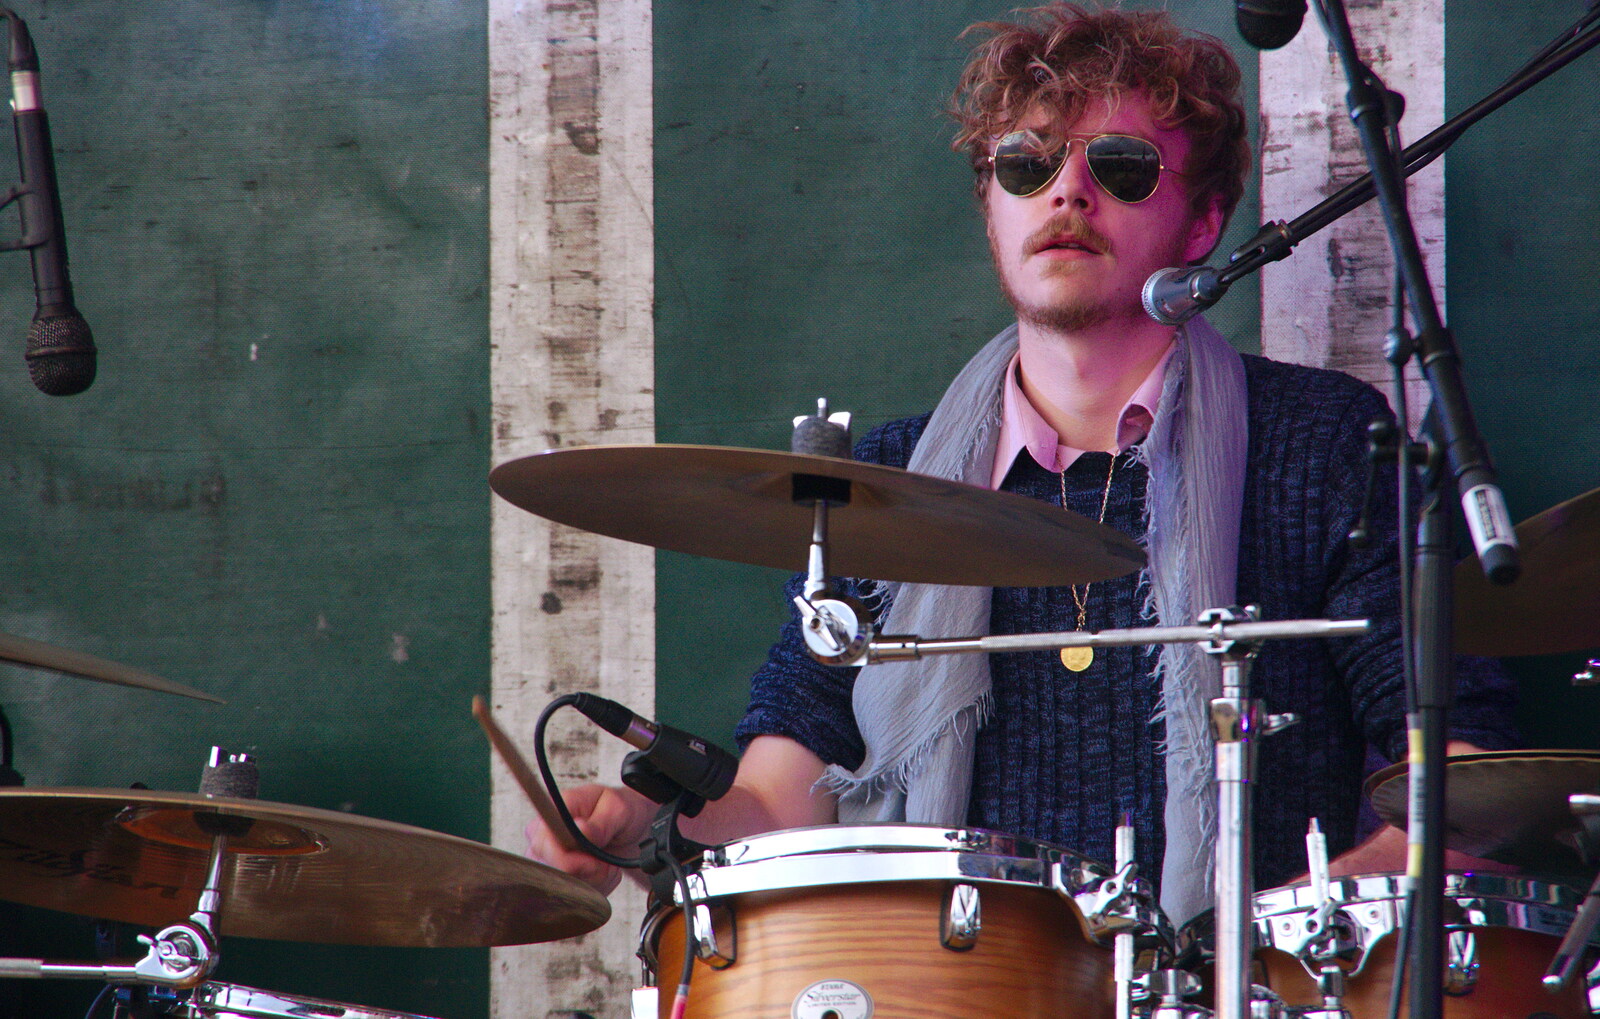 The drummer with Pilot shades from Waxham Sands and the Nelson Head Beer Festival, Horsey, Norfolk - 31st August 2019